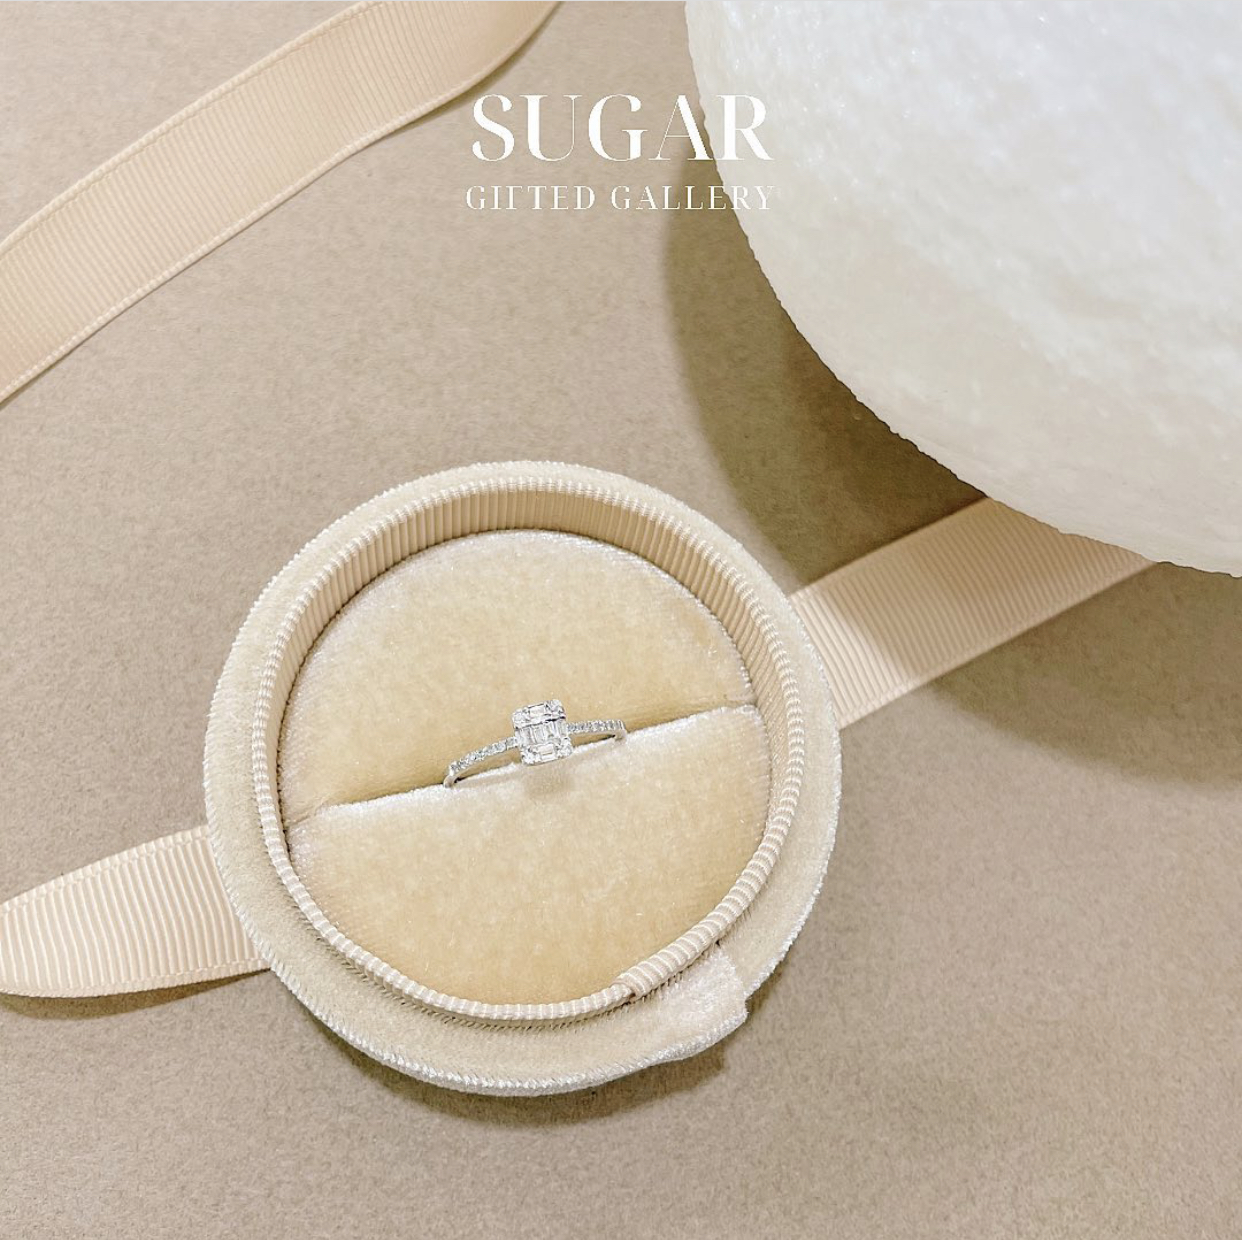 Sugar Ring Necklace by Gifted Gallery